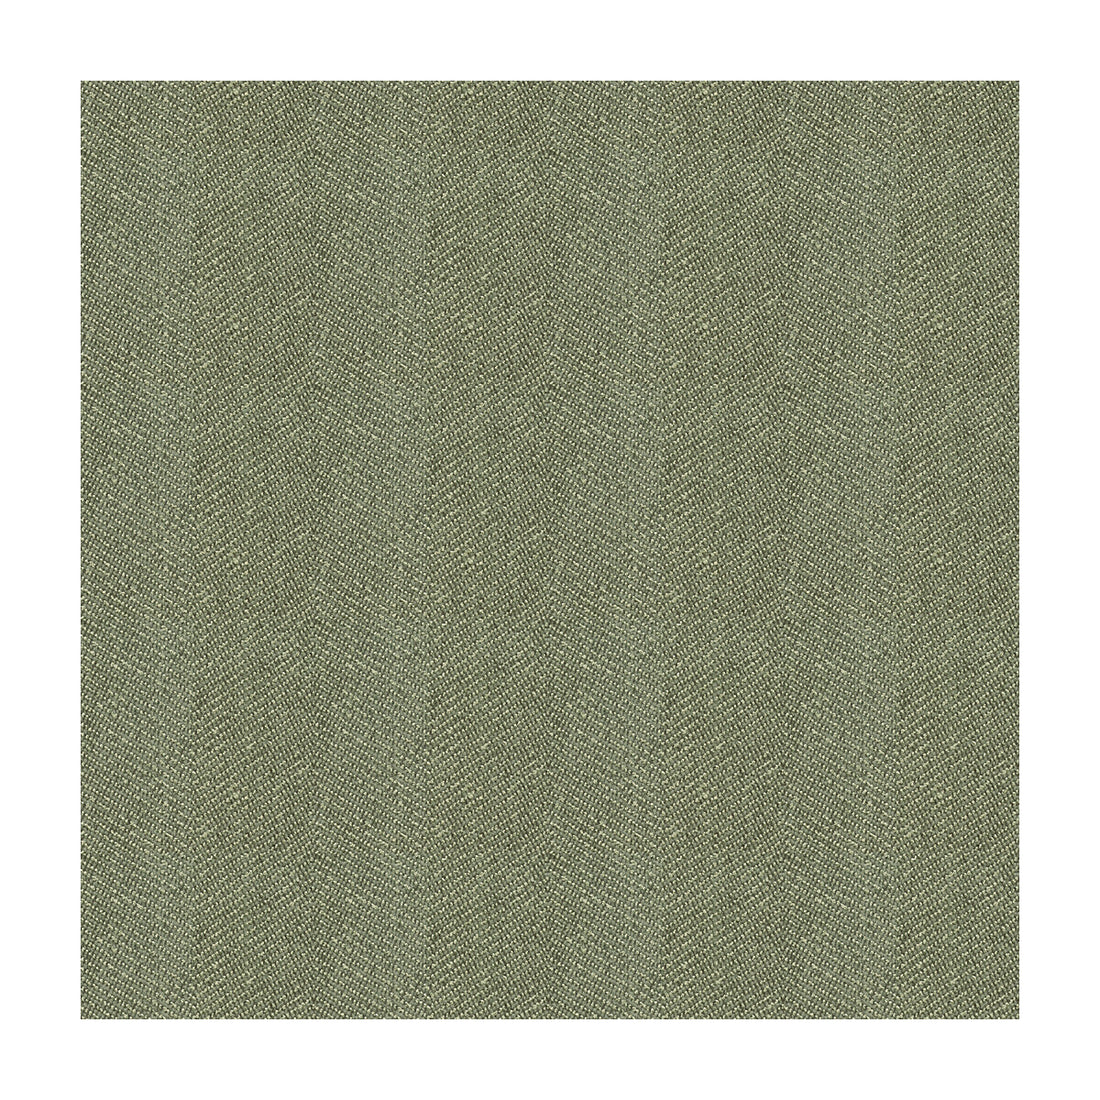 Kravet Contract fabric in 33877-1121 color - pattern 33877.1121.0 - by Kravet Contract in the Crypton Incase collection